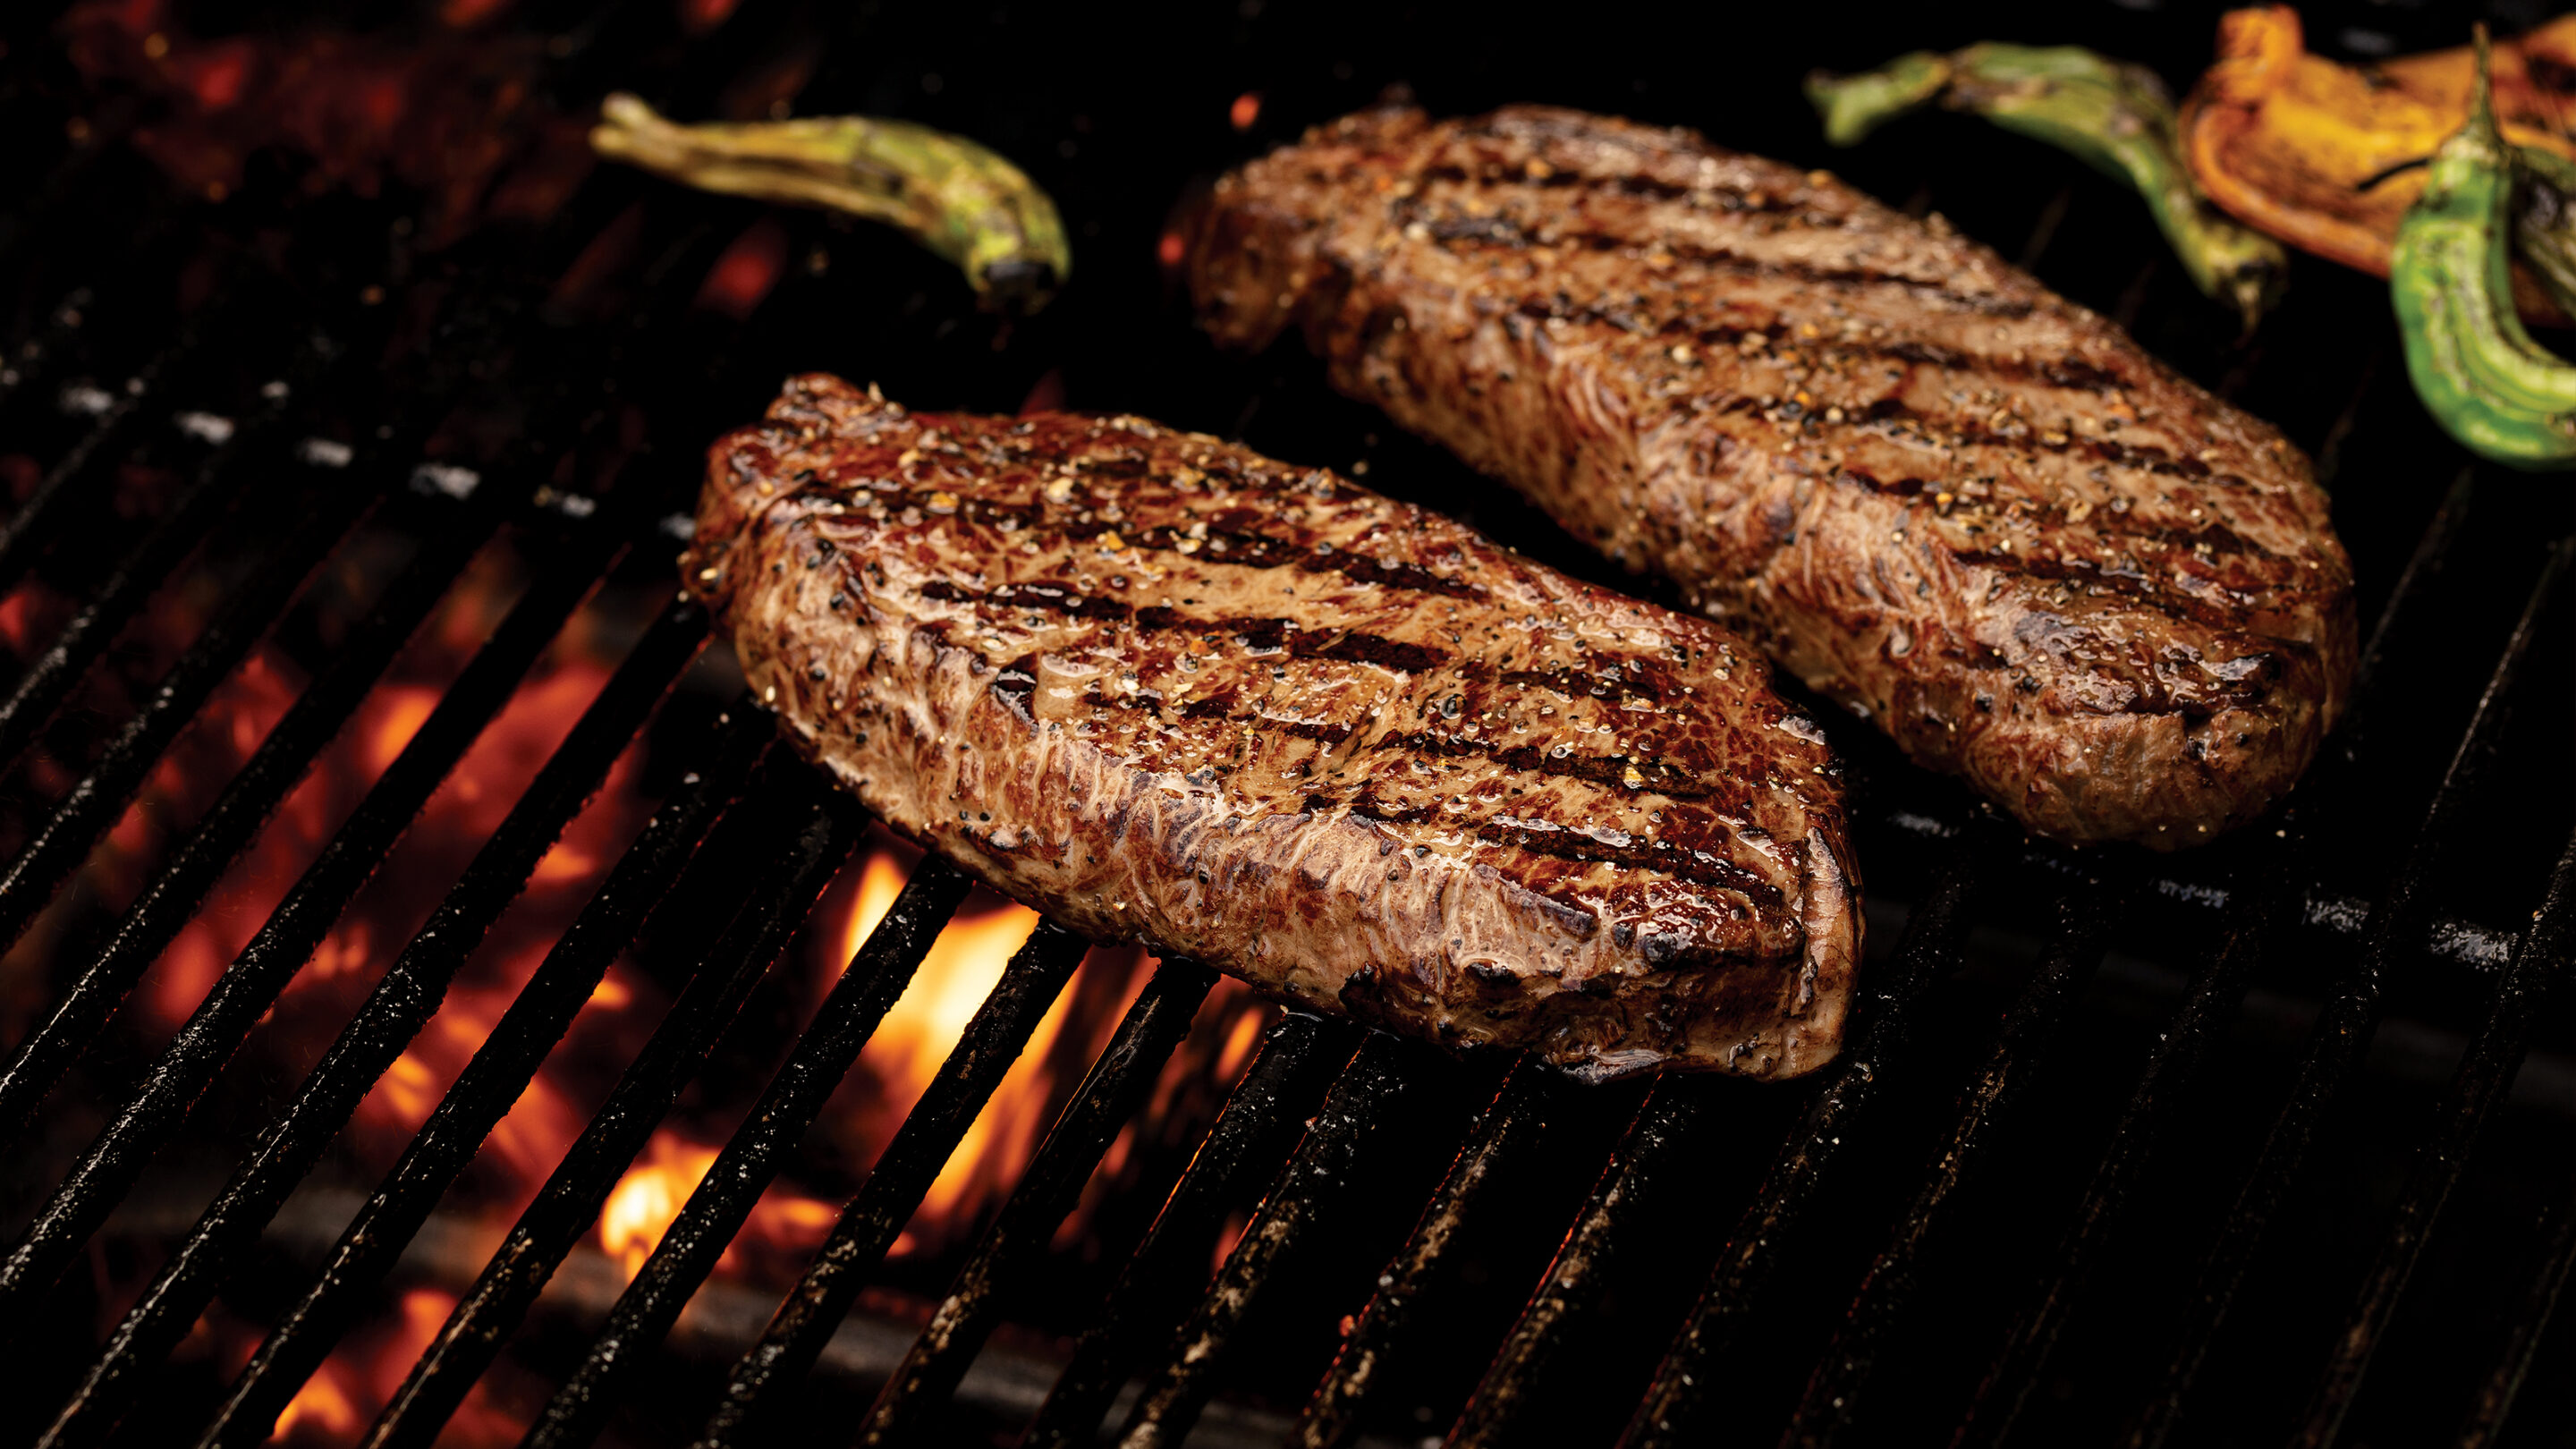 How to Grill a Steak: 8 Tips for Success